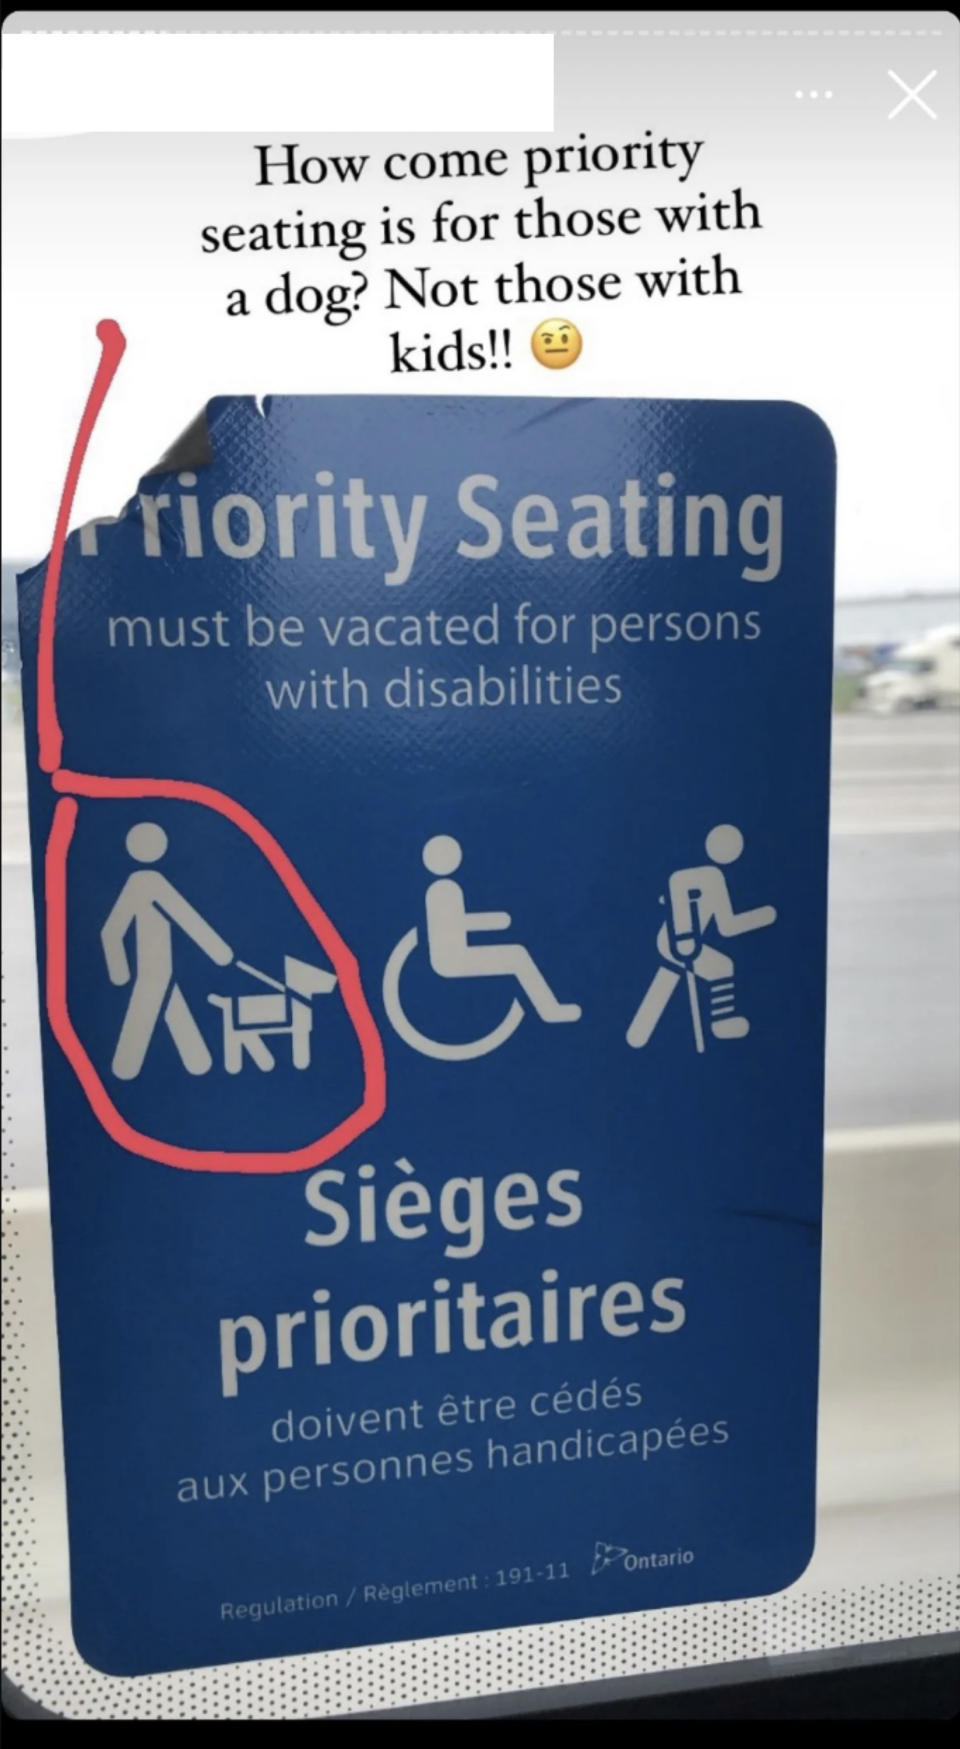 A sign says there is priority seating for passengers with disabilities, including the visually impaired who need a dog to guide them, and a person posts asking why people with dogs get priority over people with kids